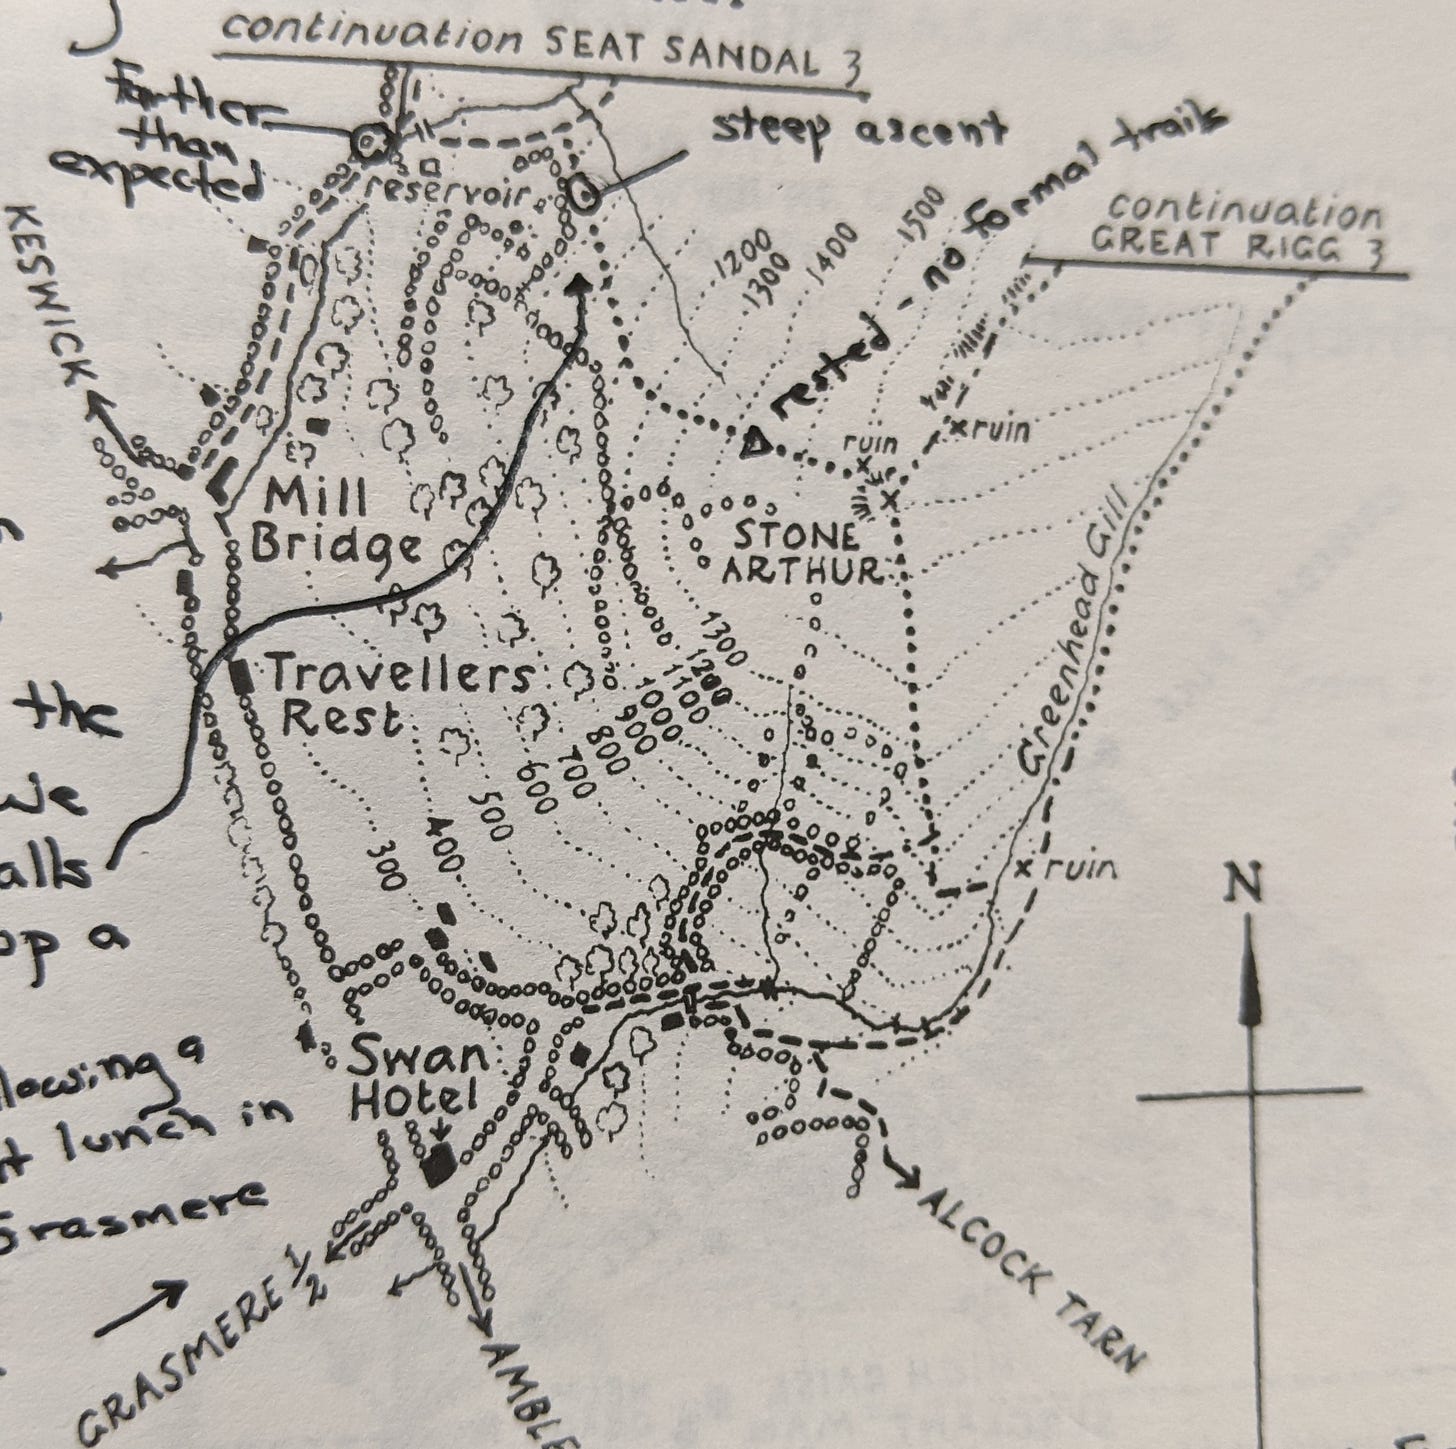 A hand-drawn map from the book, with my annotations on it